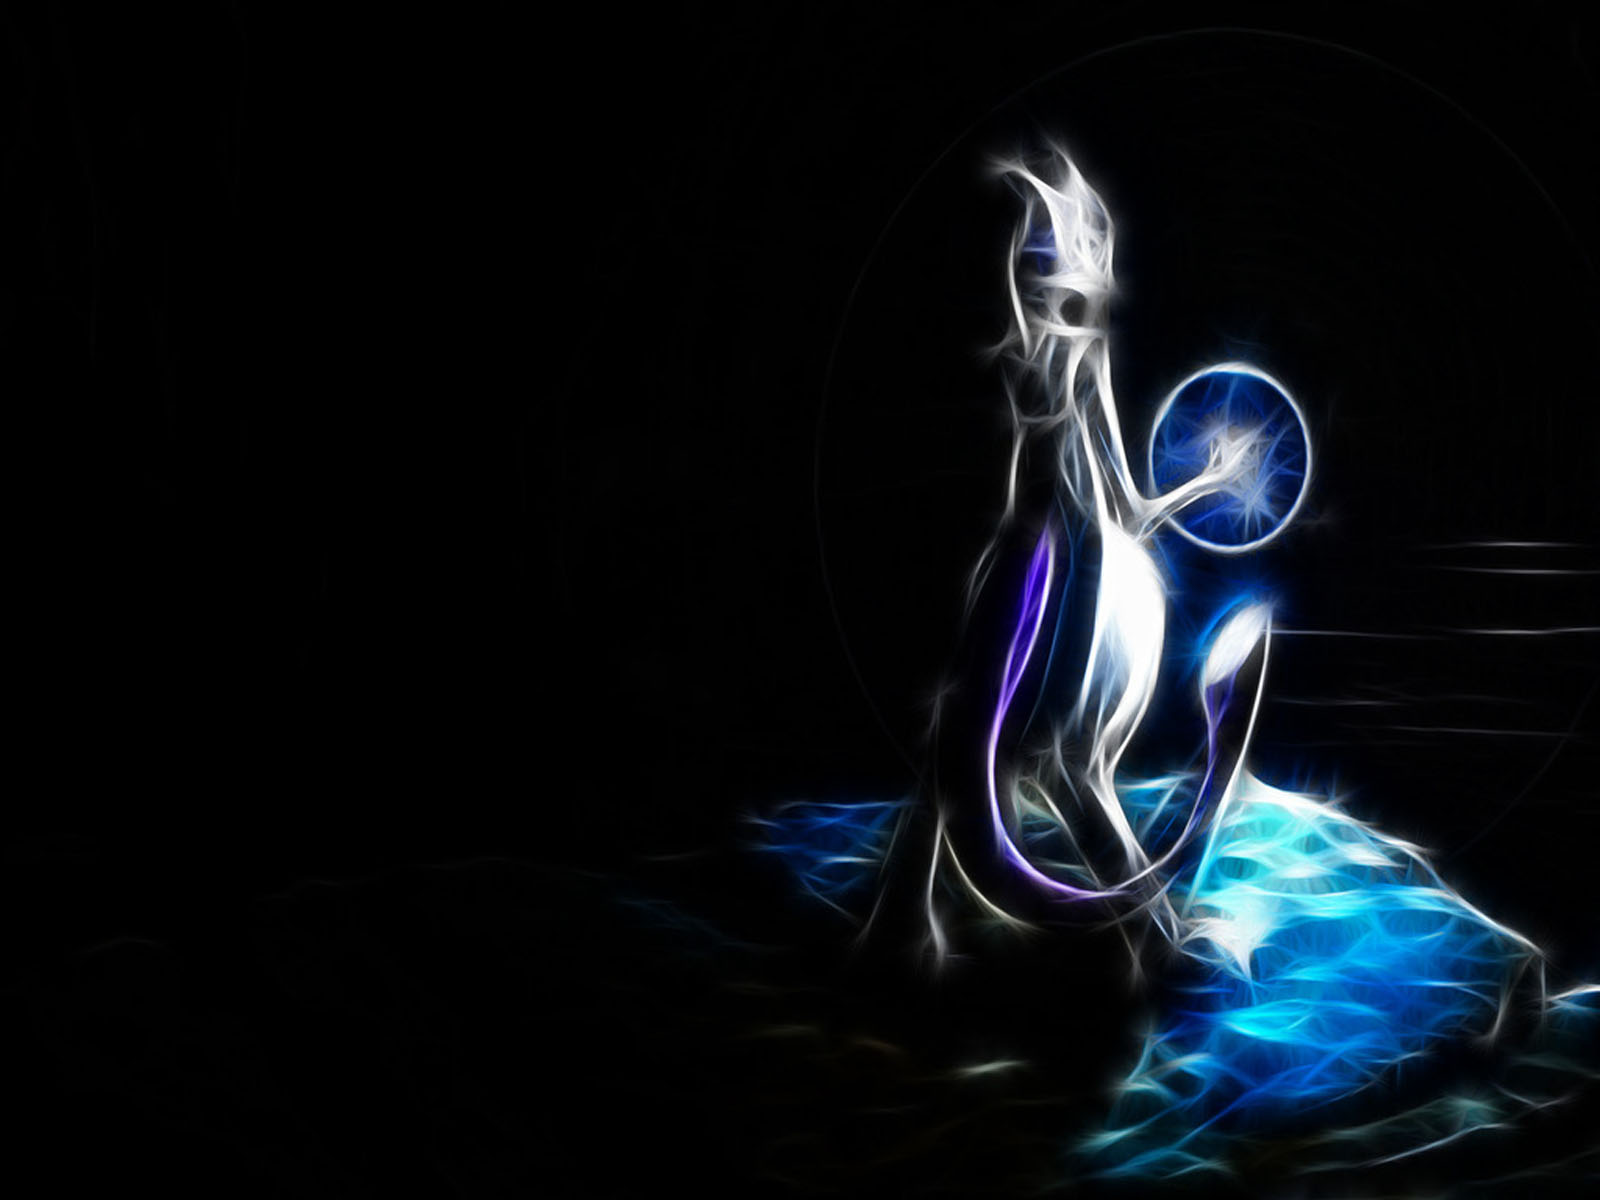 Tag Mewtwo Pokemon Wallpaper Image Photos And Pictures For